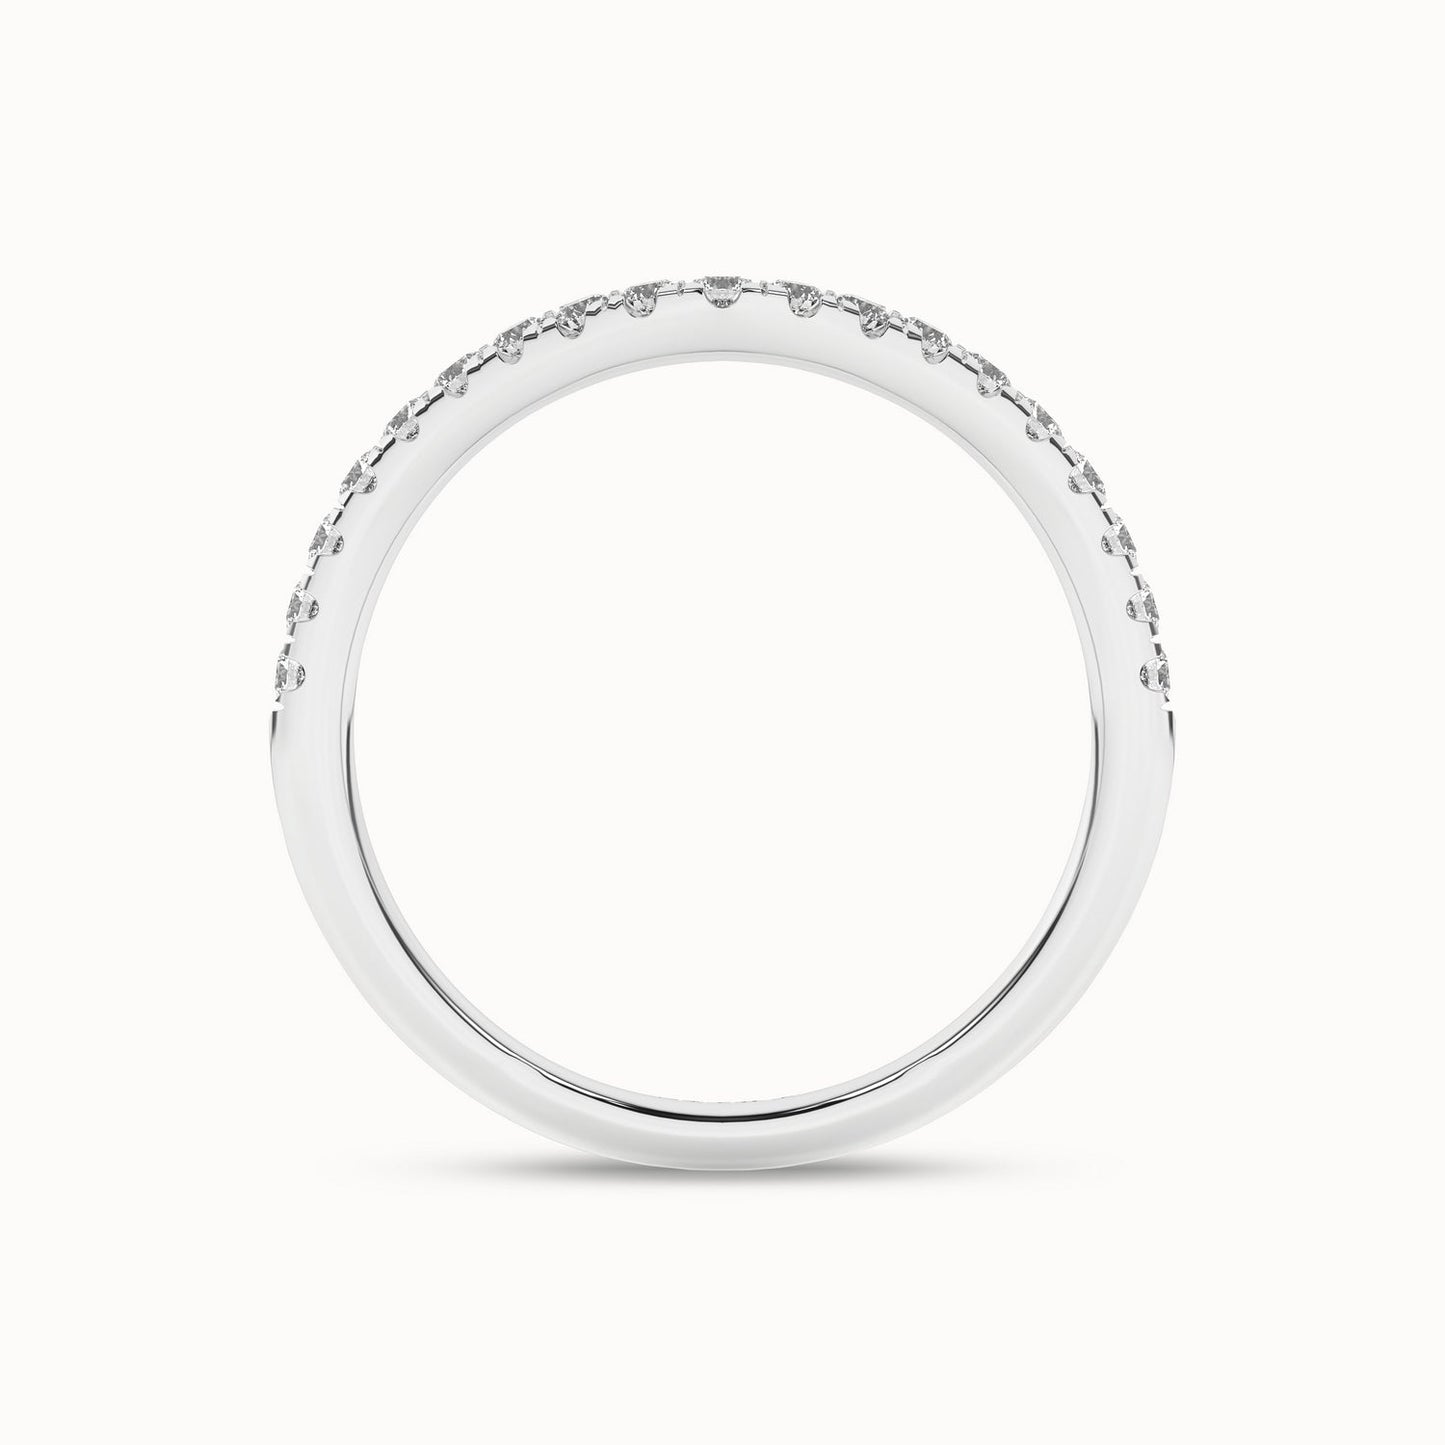 Rippling Round Ring_Product Angle_1/4Ct. - 3